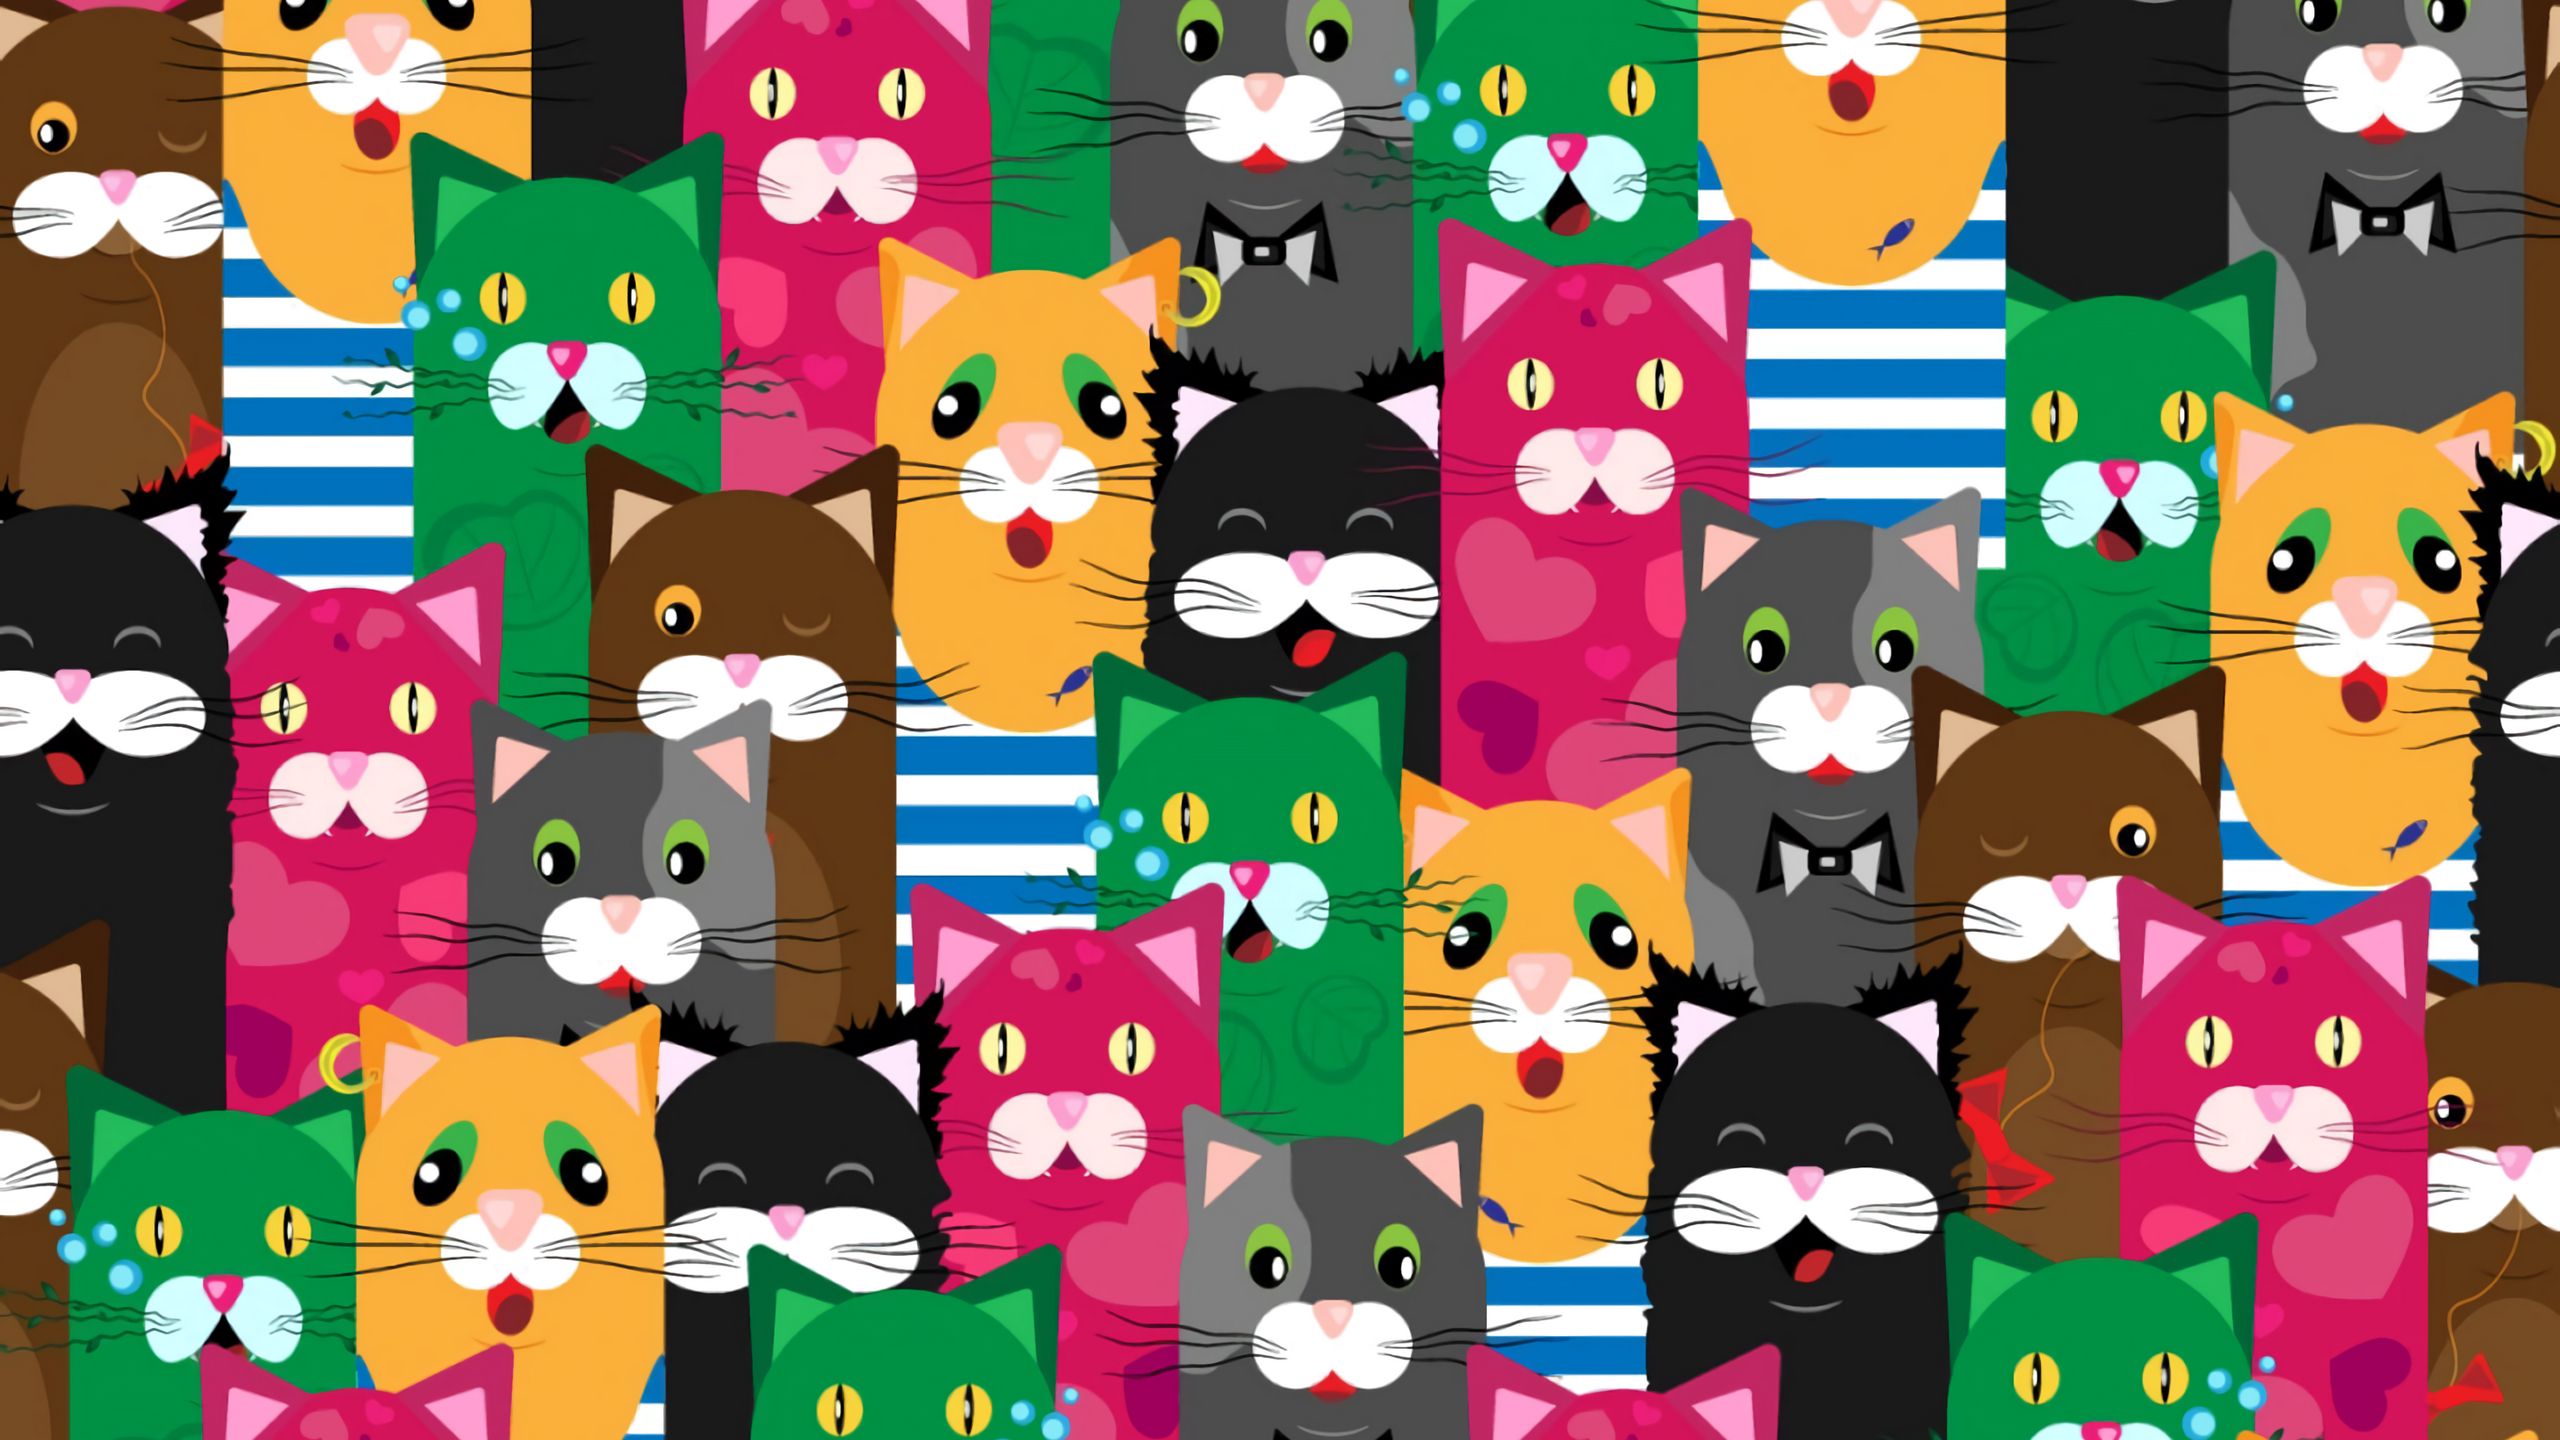 Download wallpaper 2560x1440 cats, funny, colorful, pattern, texture widescreen 16:9 HD background